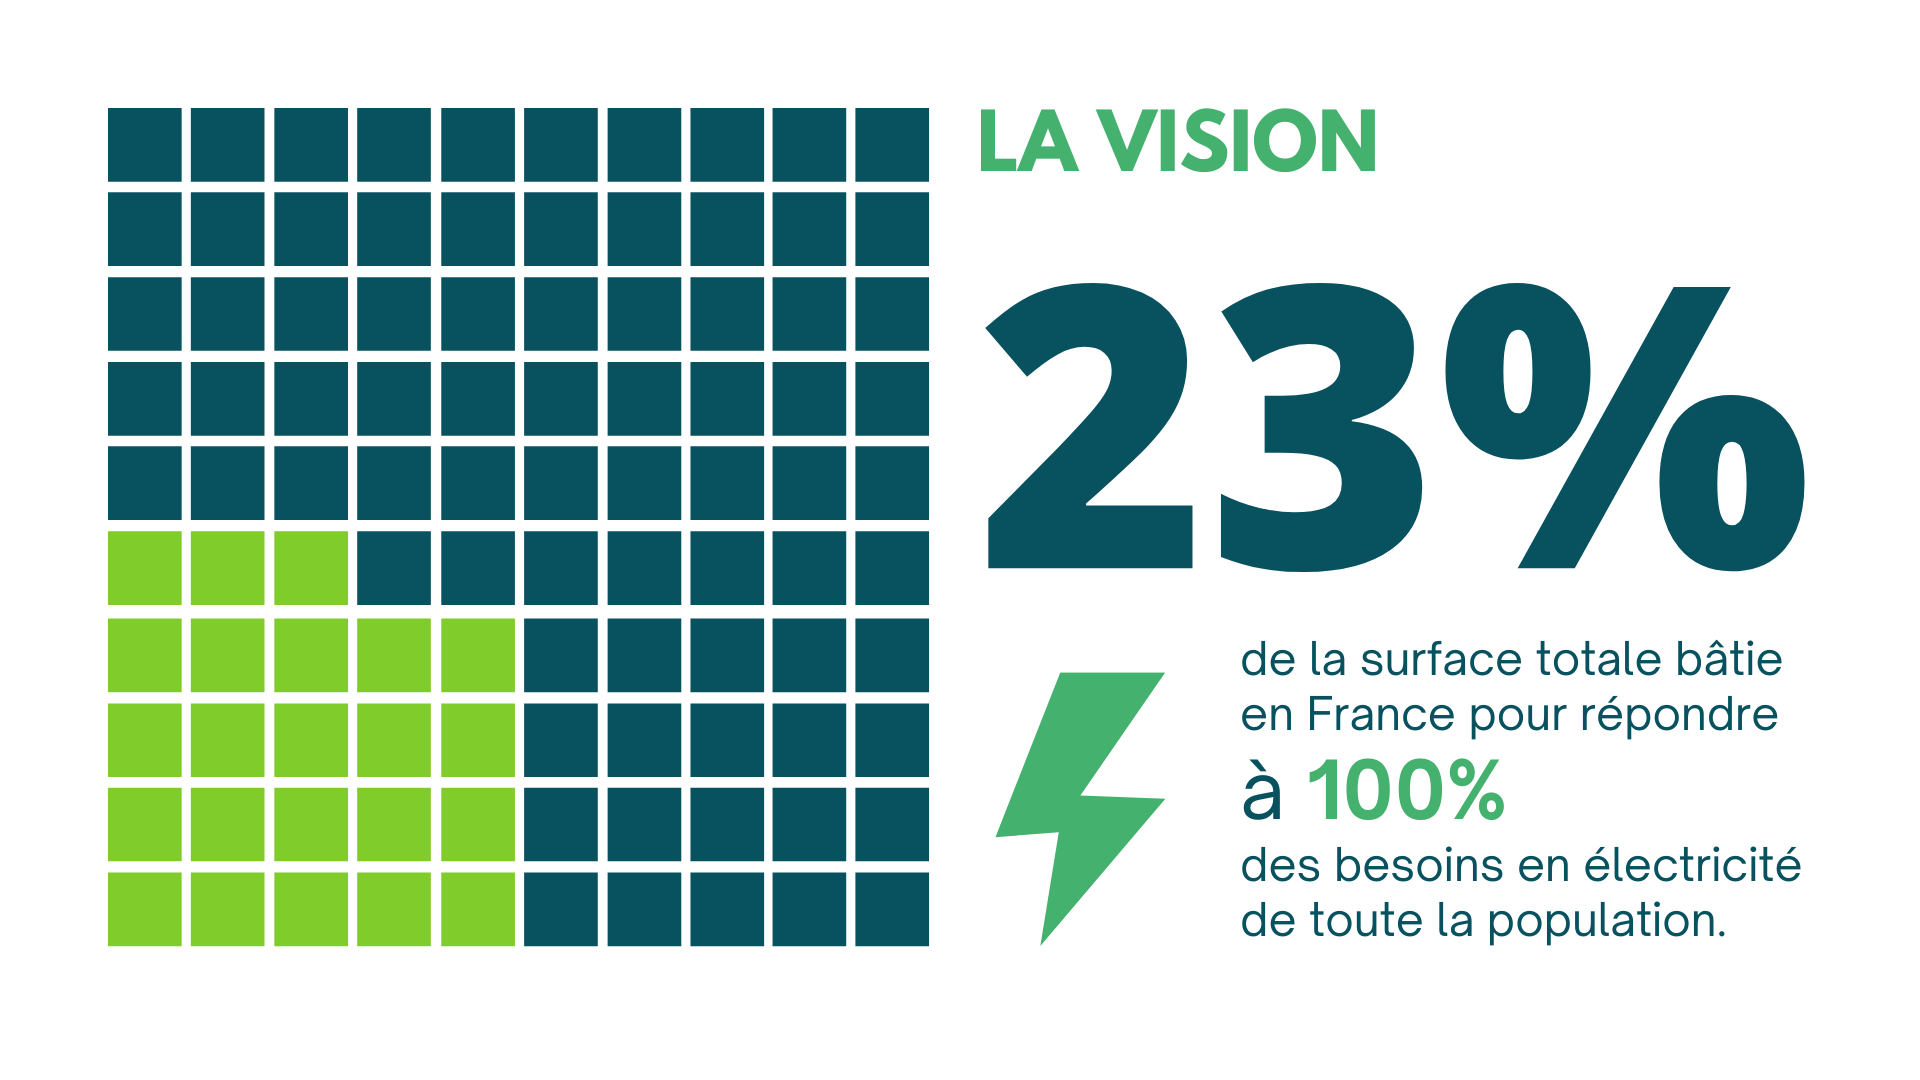 Vision Objectif 23%